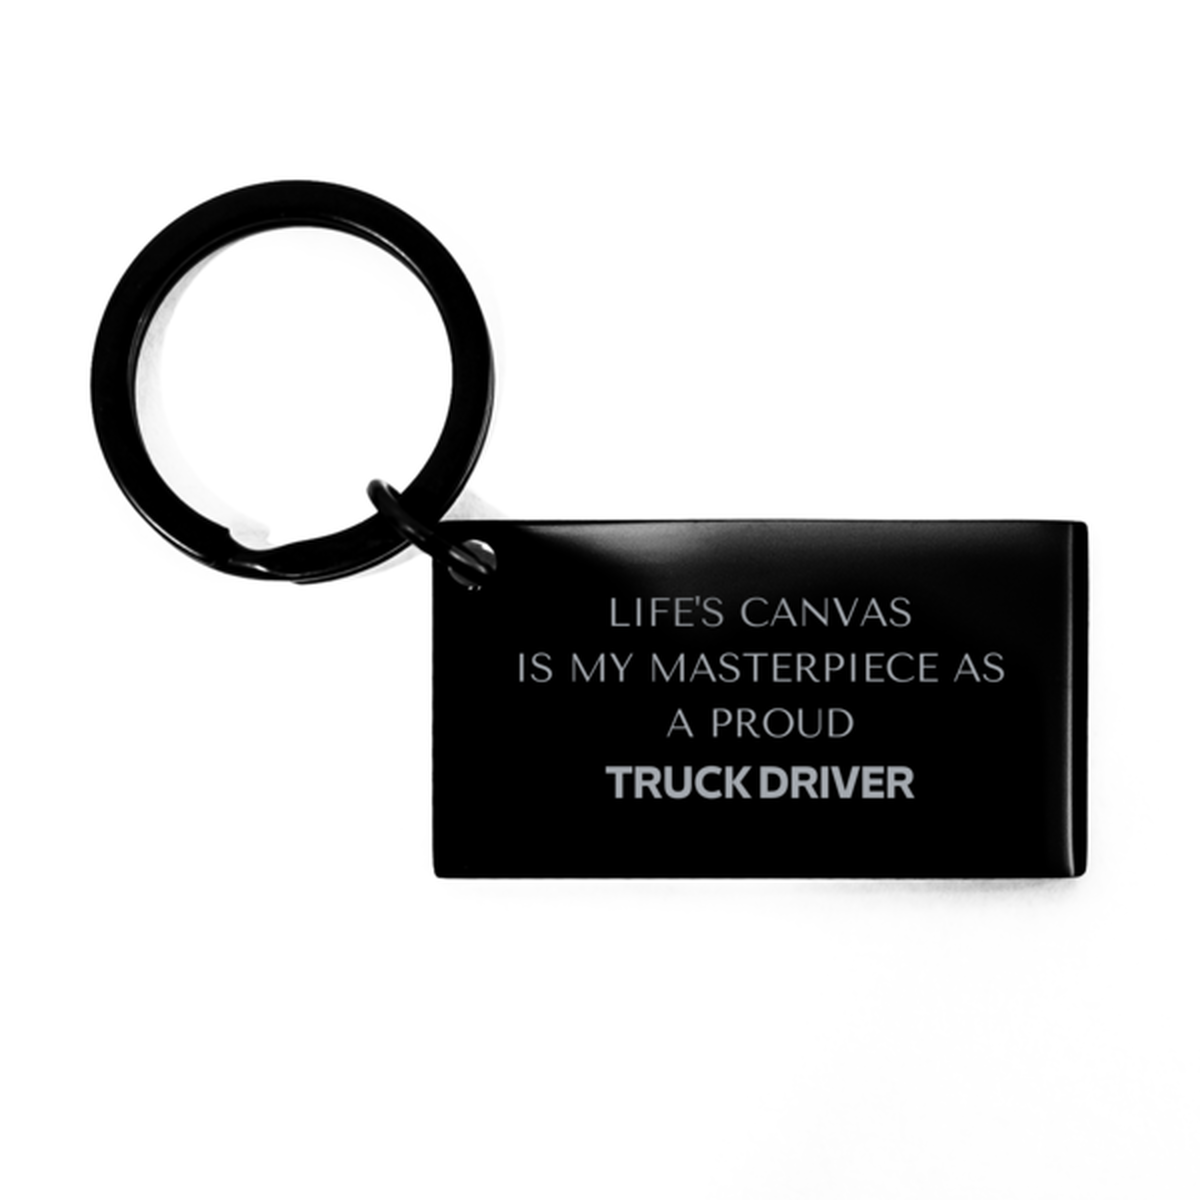 Proud Truck Driver Gifts, Life's canvas is my masterpiece, Epic Birthday Christmas Unique Keychain For Truck Driver, Coworkers, Men, Women, Friends